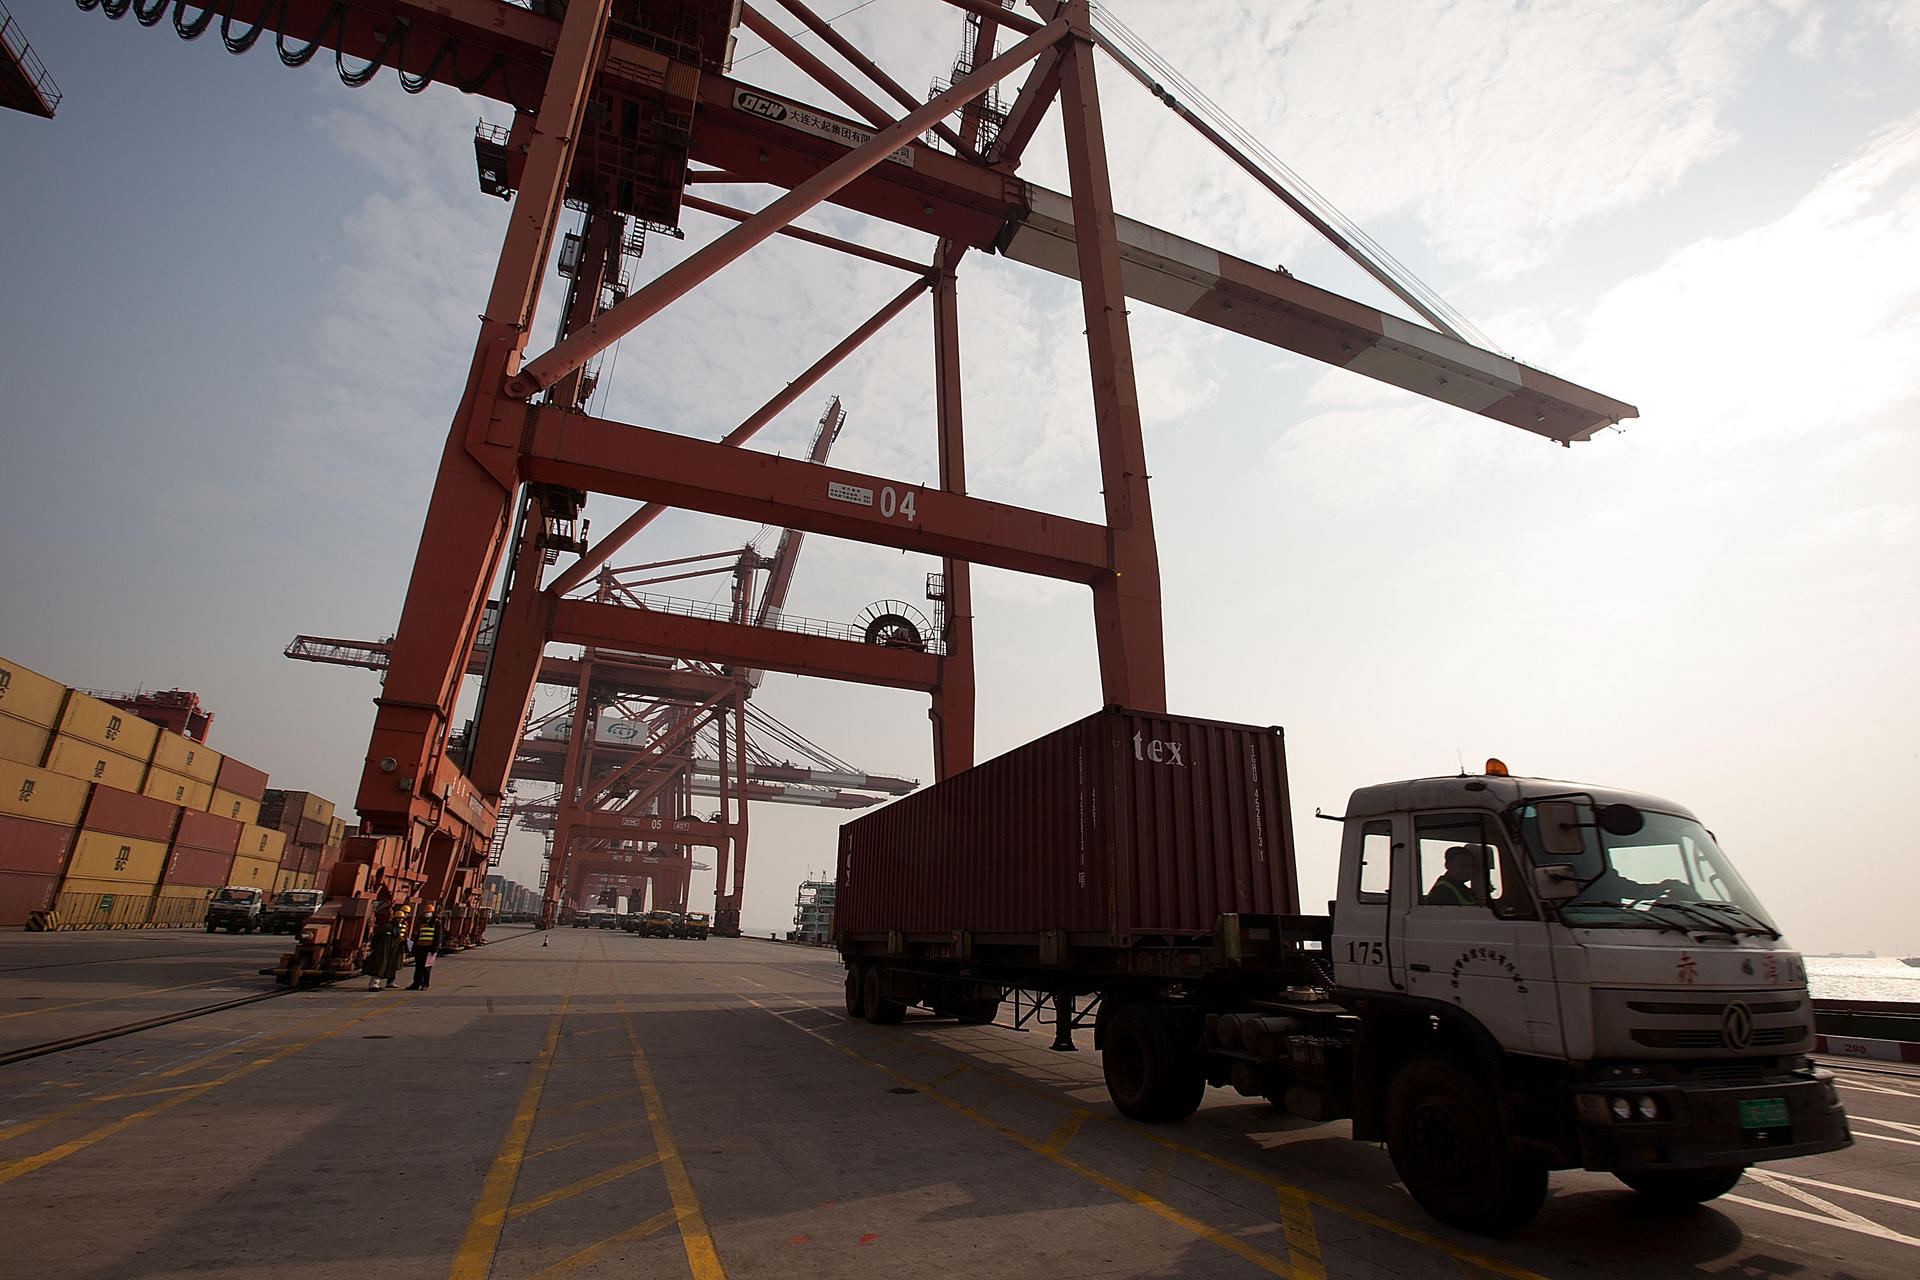 An accord with Guangdong Customs has been "helpful" for Hong Kong manufacturers during a dock strike earlier this year. Photo: Bloomberg